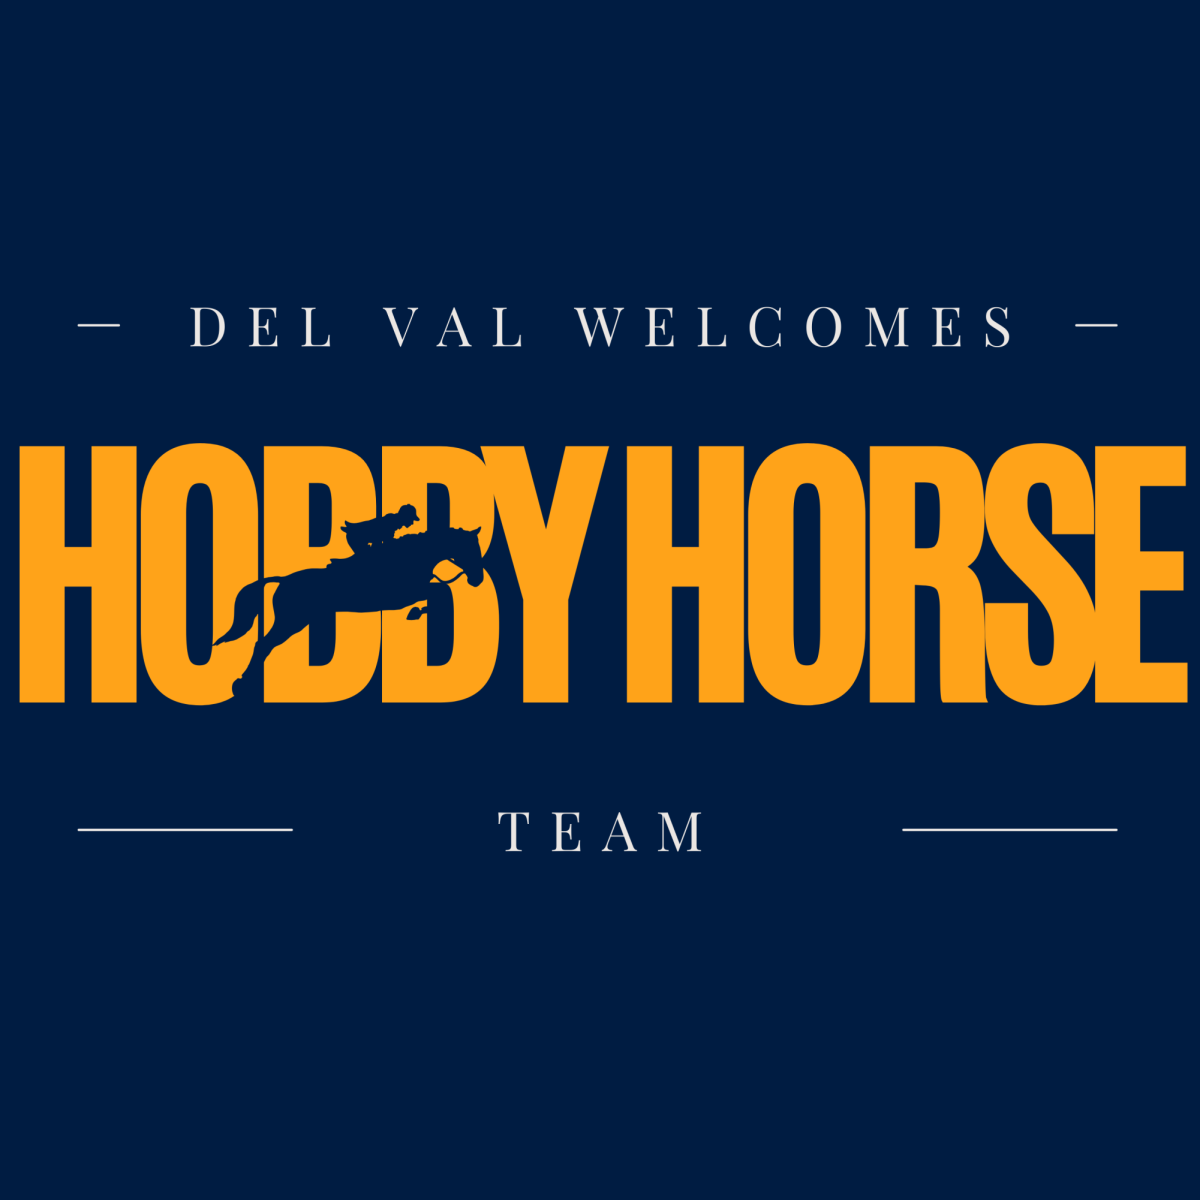 In the 2024-2025 school year, Del Val will be offering hobby horse as a new sport for students to partake in.